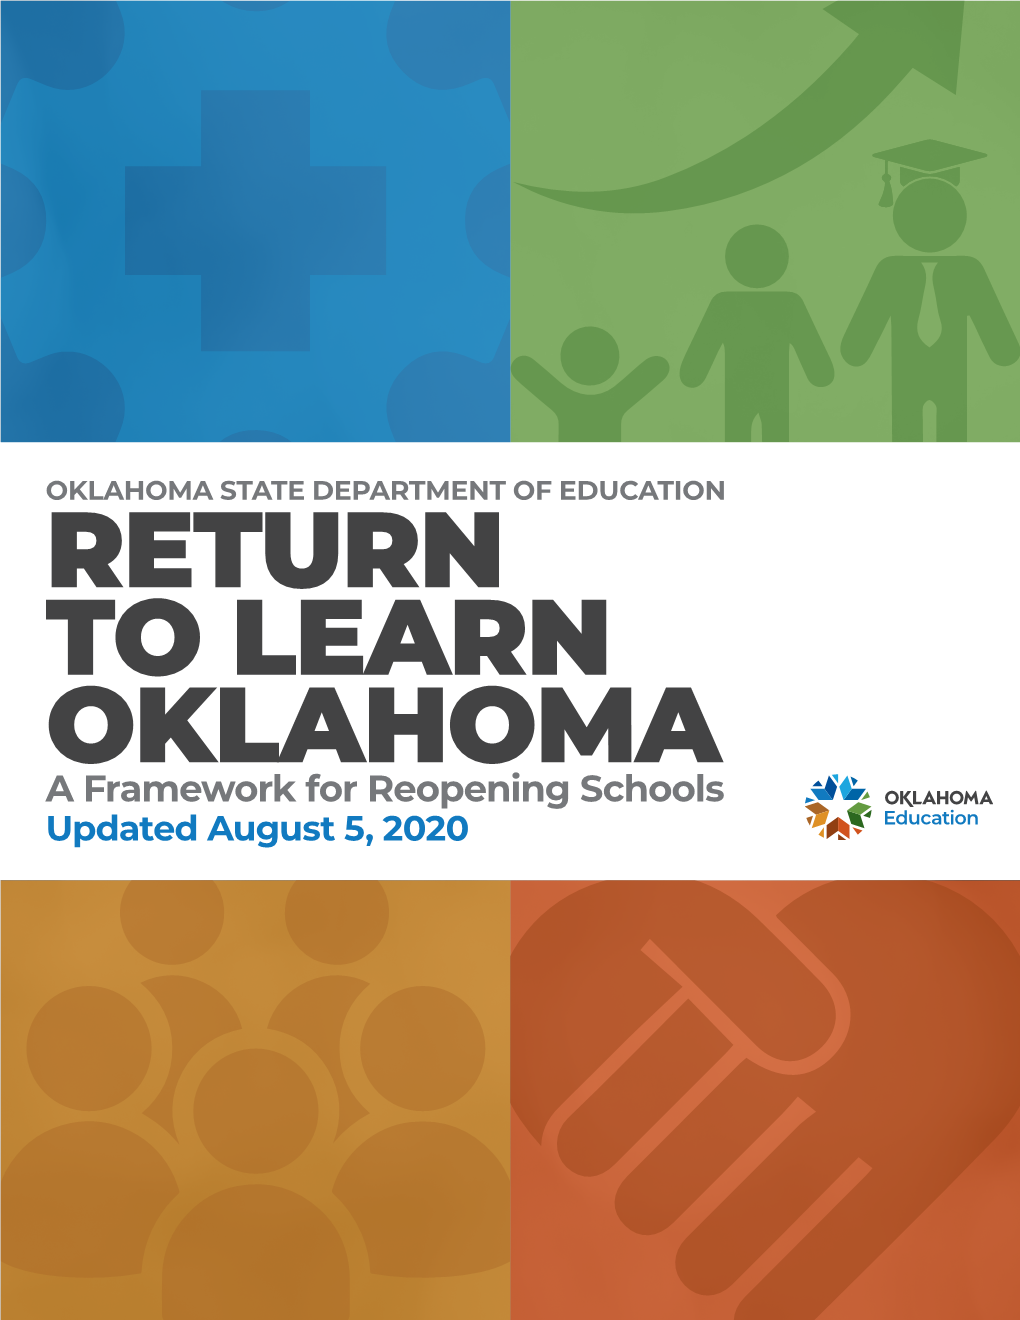 Return to Learn Oklahoma: a Framework for Reopening Schools